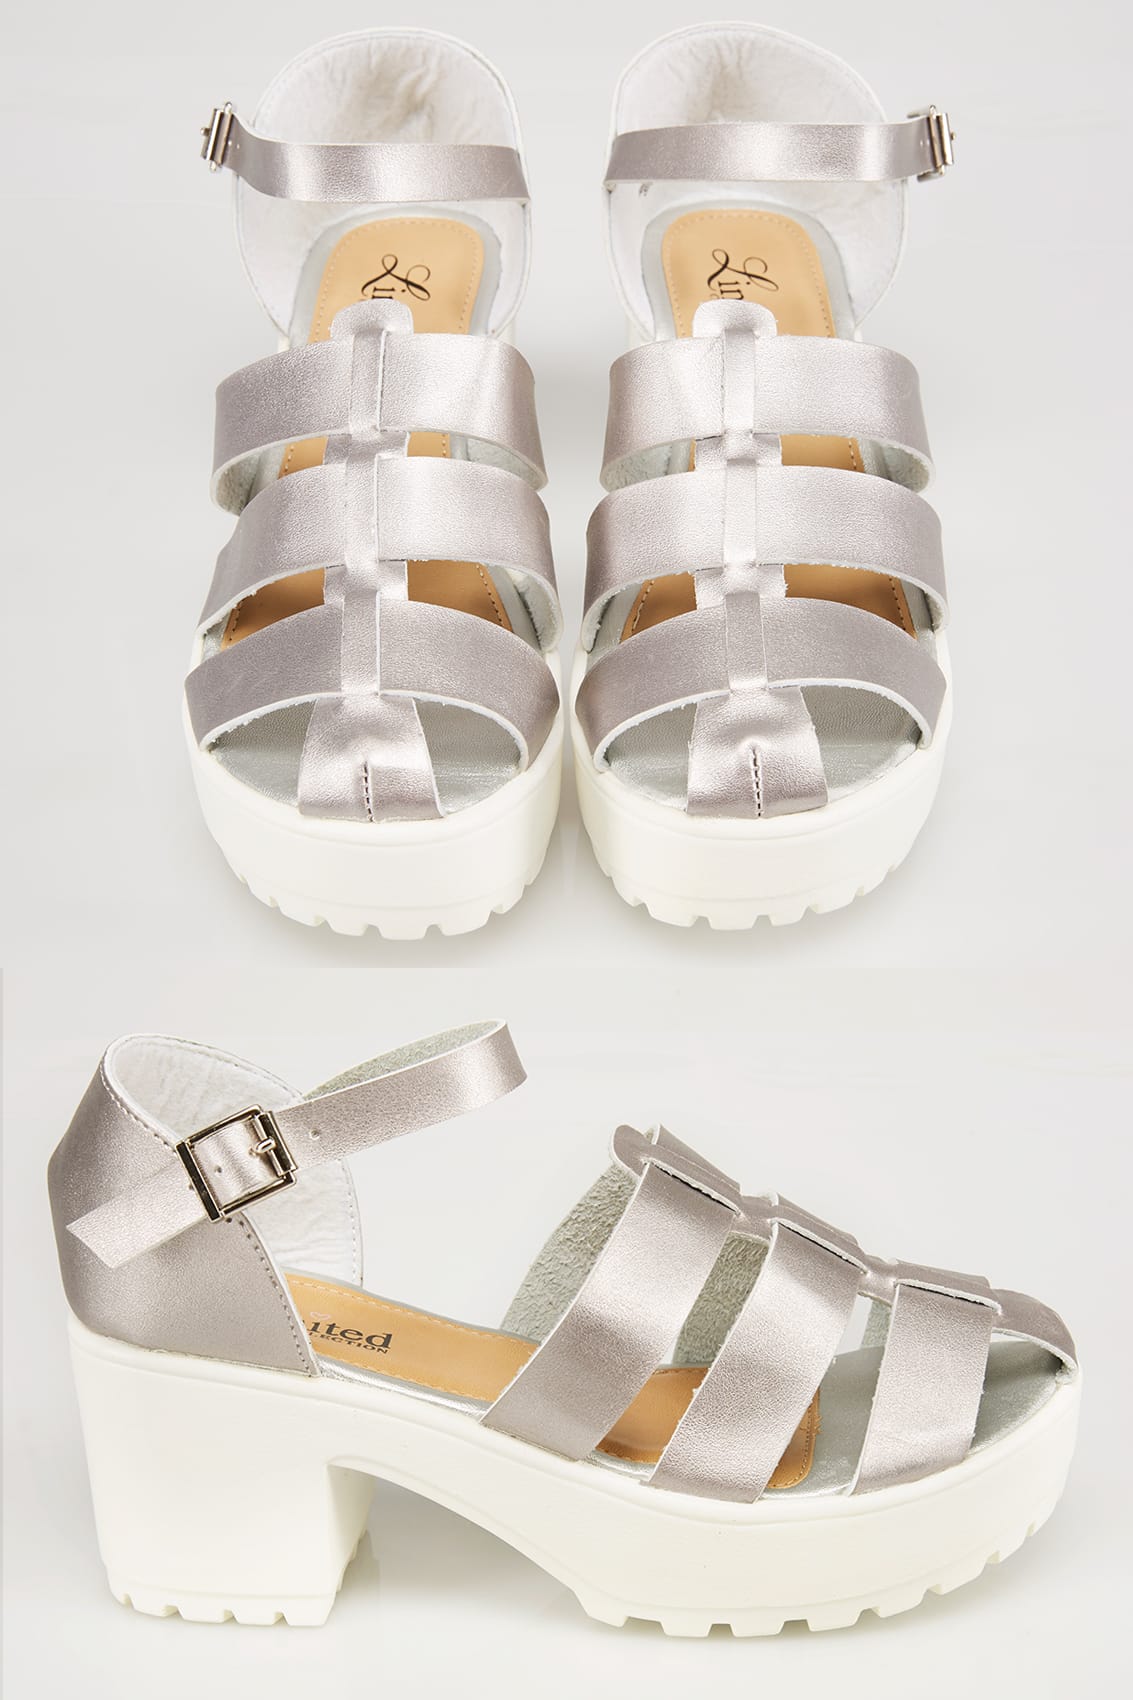 Silver & White Platform Gladiator Sandals In E Fit size 4,5,6,7,8,9